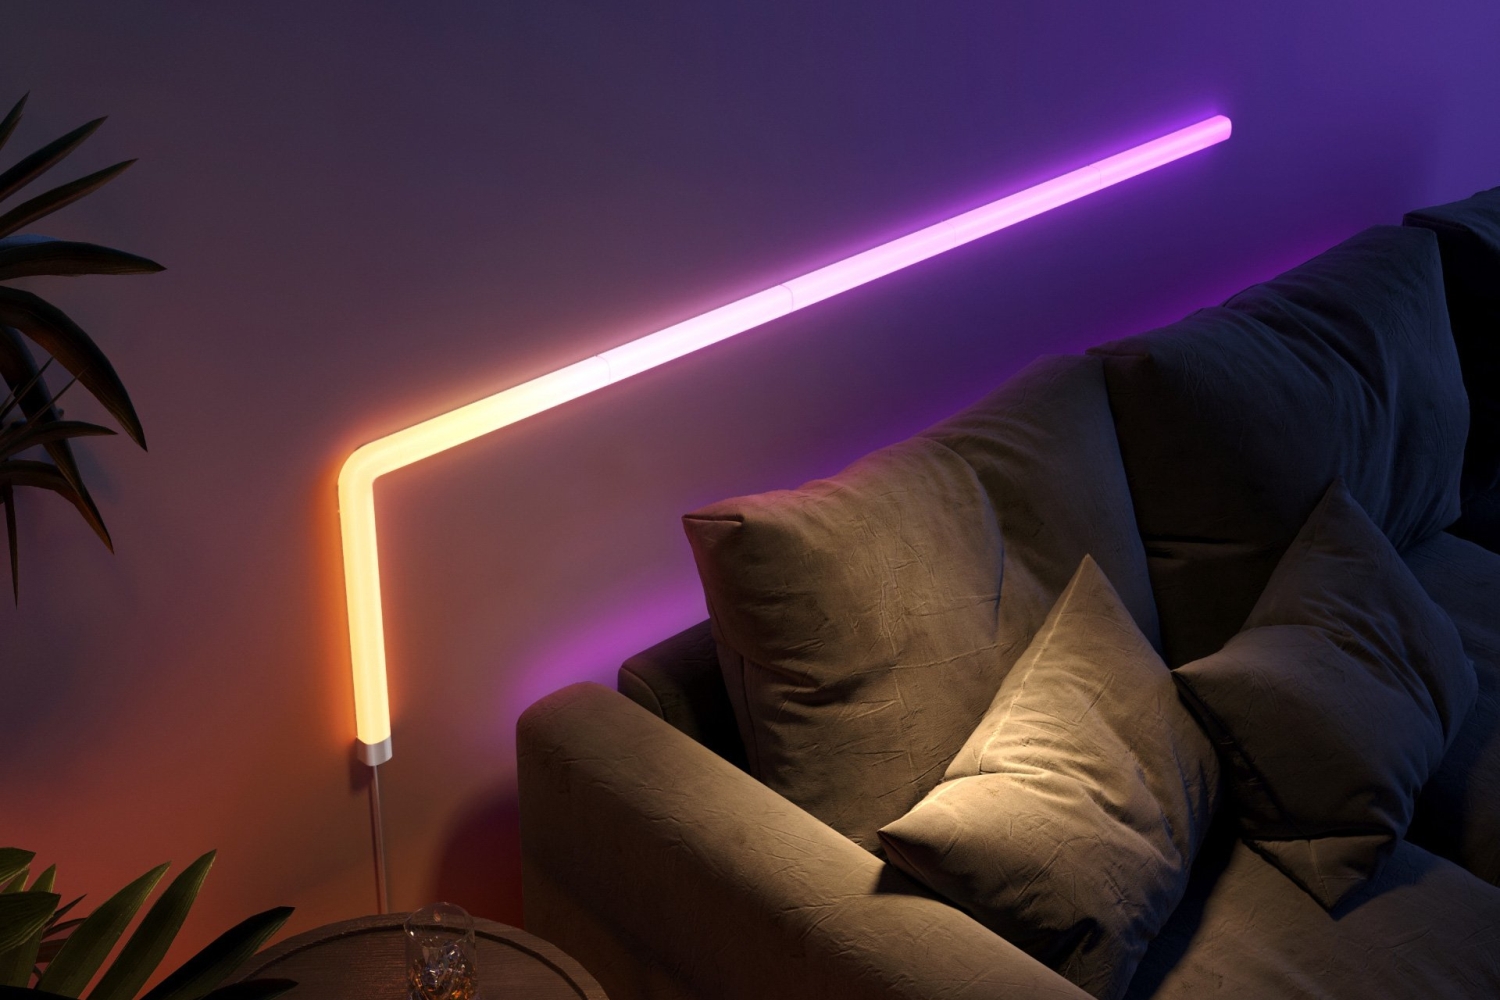 Govee Glide Wall Light Review: Add Color to Your Wall | Digital Trends